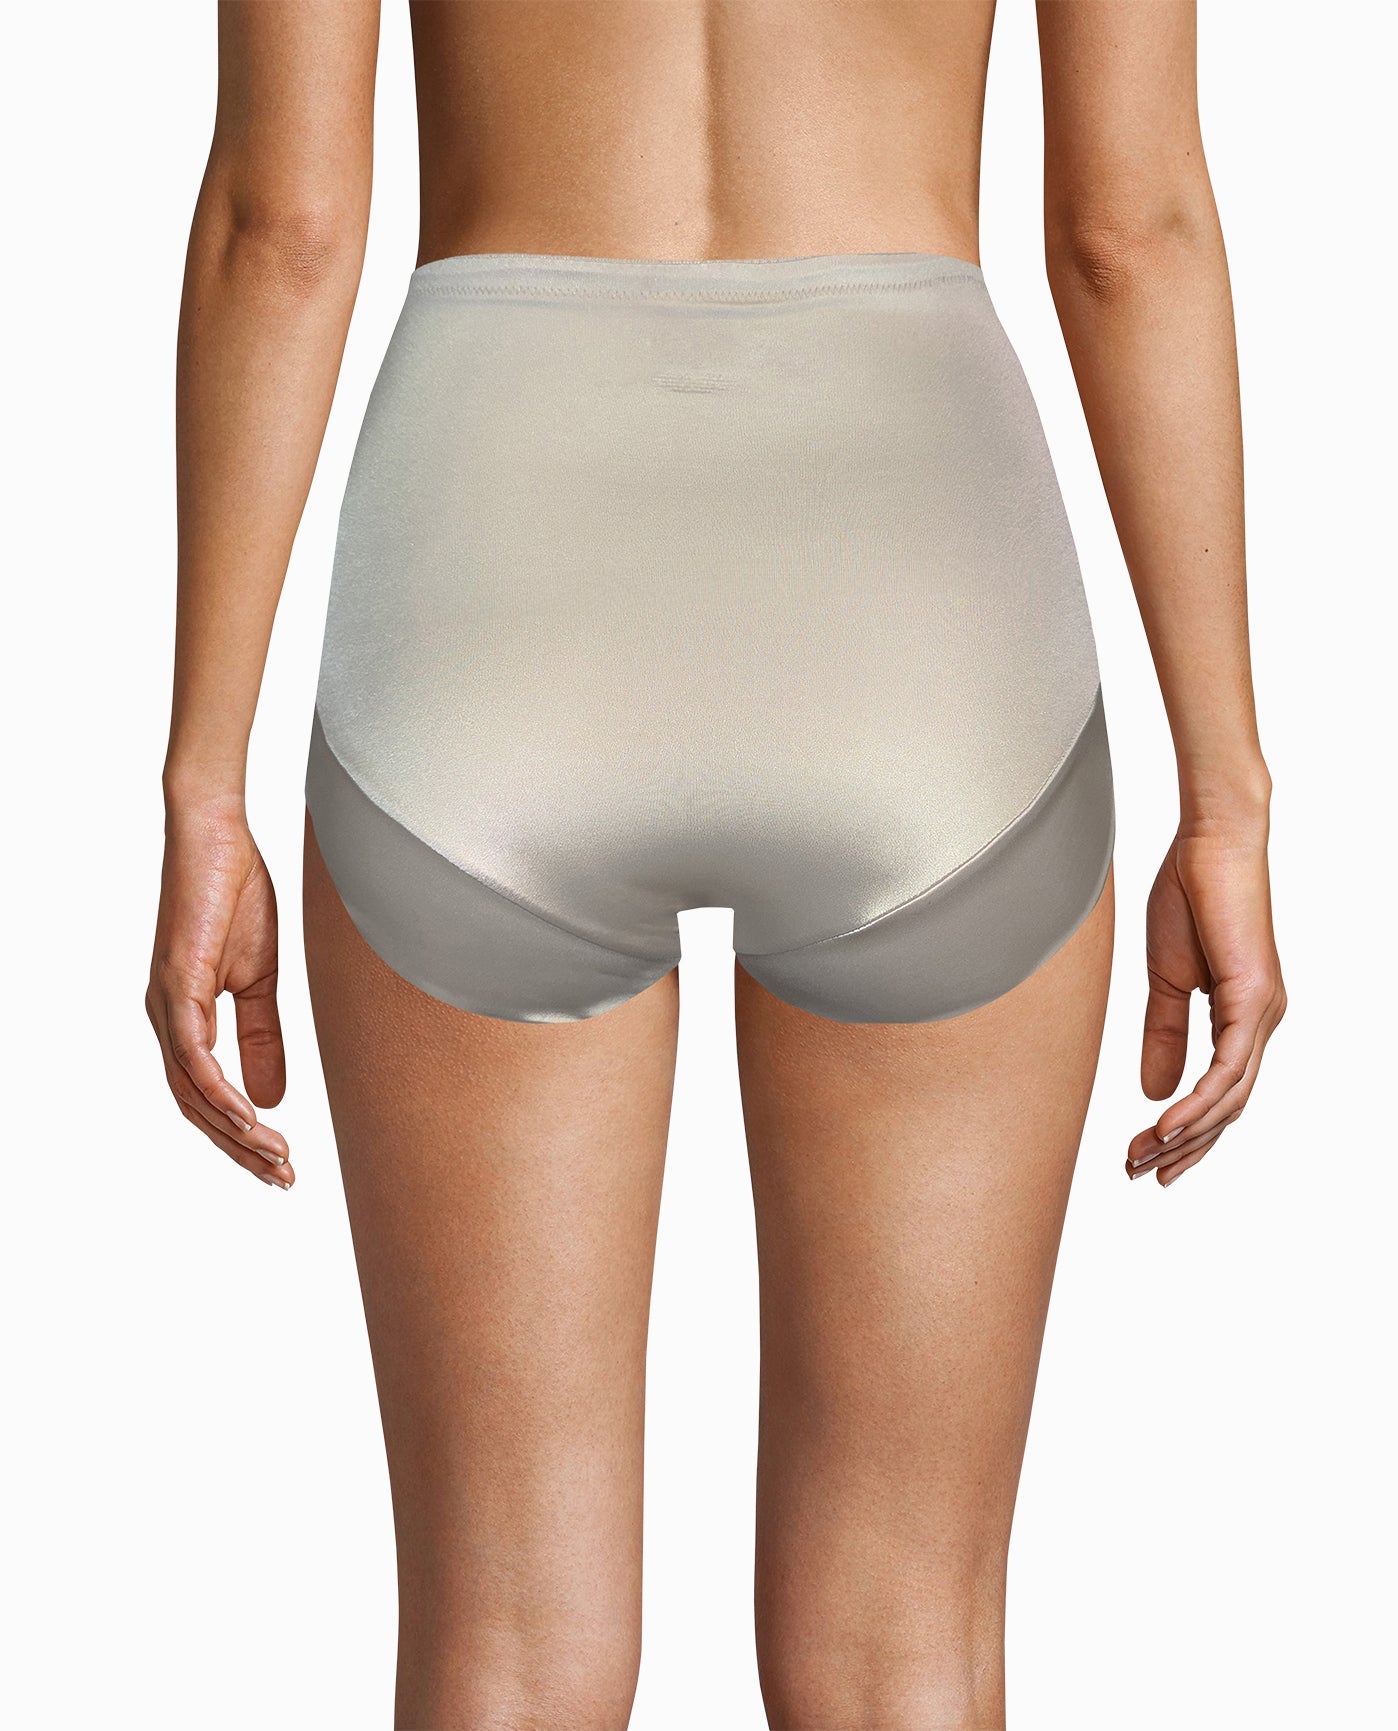 BACK OF DUNE DUST SHINY MICRO HIGH WAISTED SHAPING BRIEFS | Dune Dust and Black